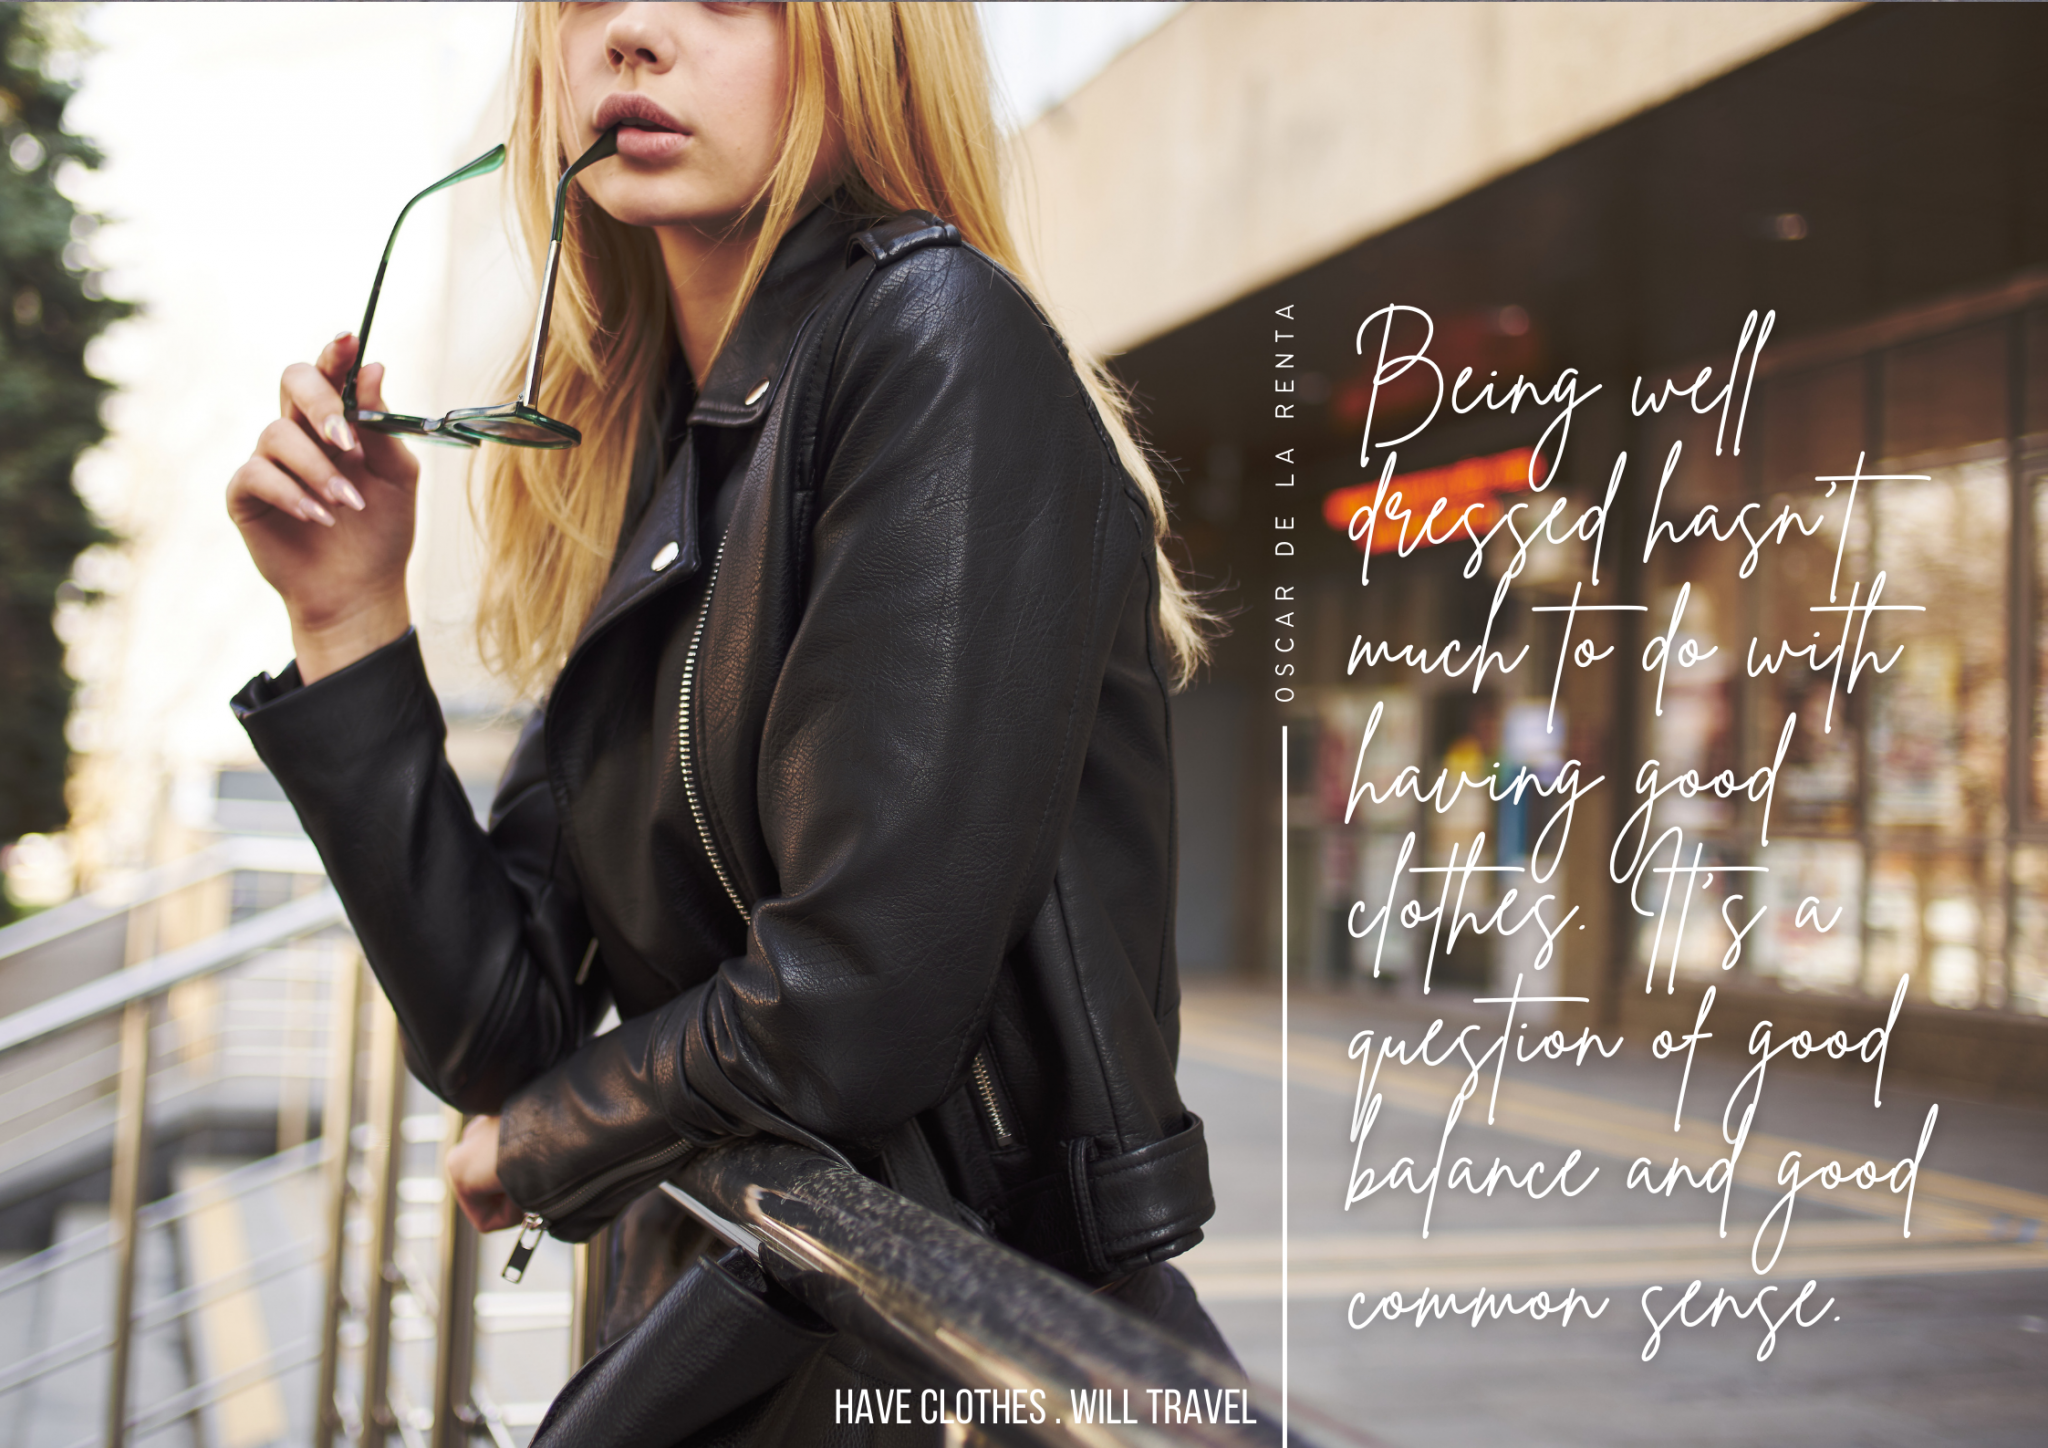 A young blonde woman poses on a city street, wearing a sharp black leather jacket. Handwritten-style text on the image says, "Being well dressed hasn’t much to do with having good clothes. It’s a question of good balance and good common sense. – Oscar de la Renta"